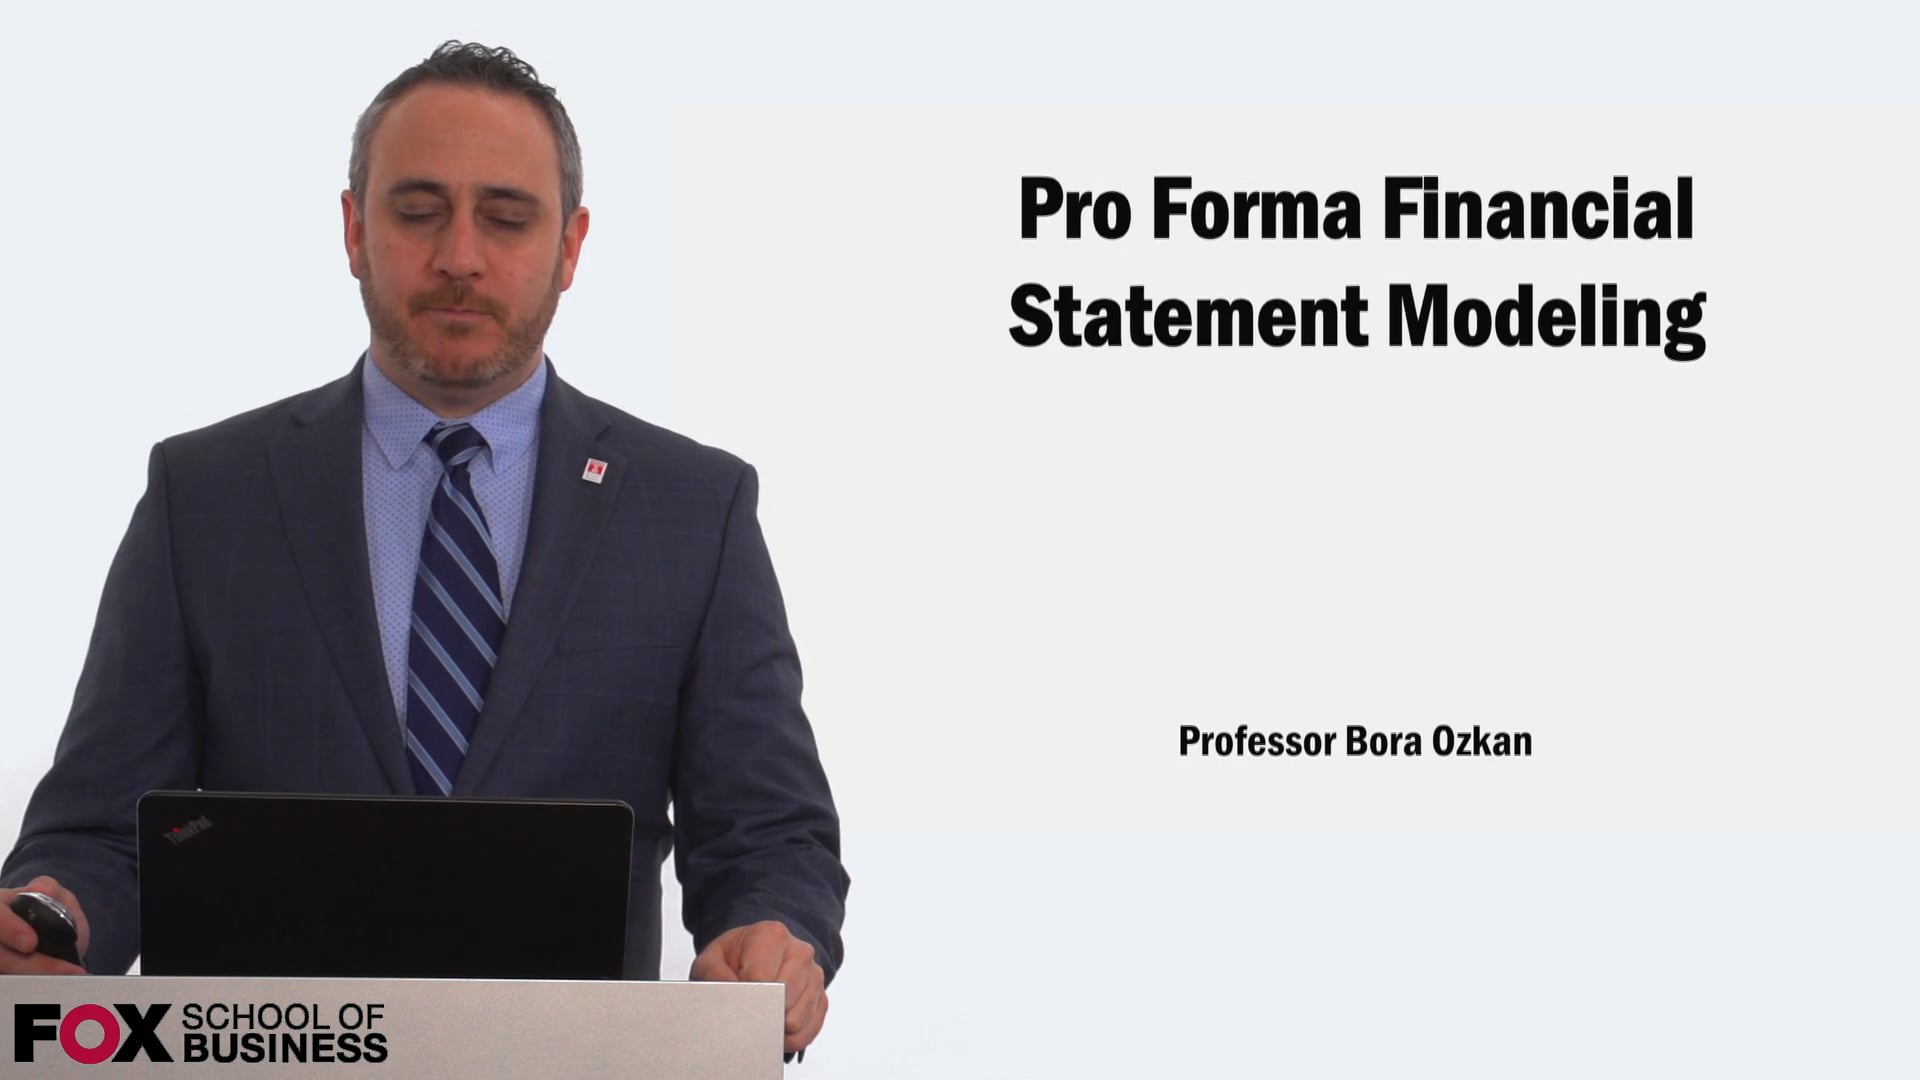 Pro Forma Financial Statement Modeling